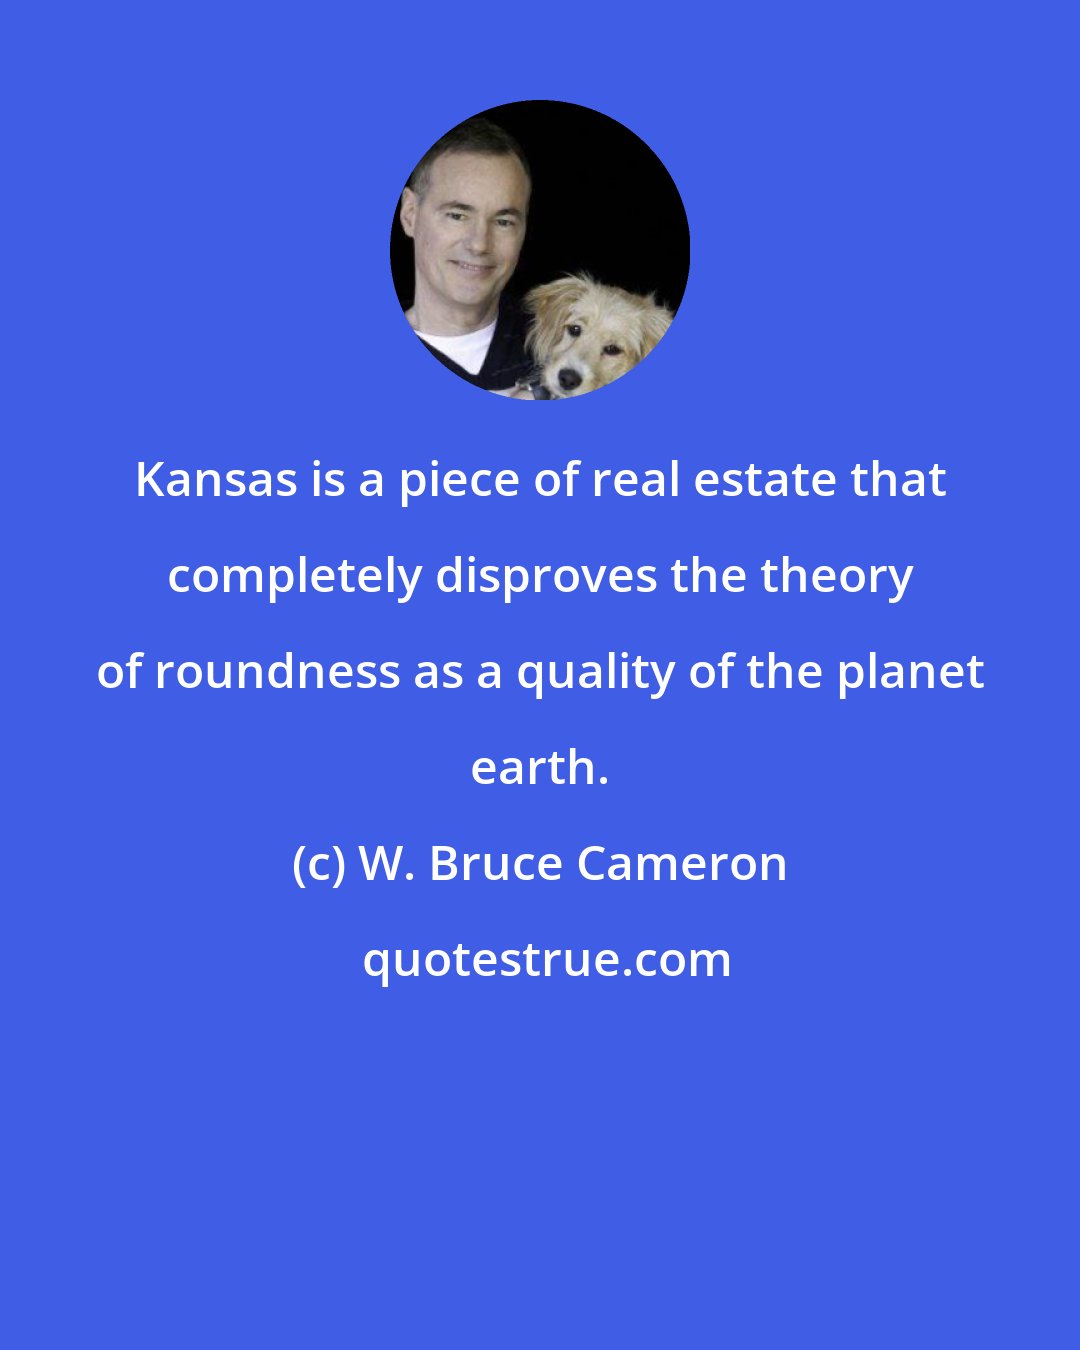 W. Bruce Cameron: Kansas is a piece of real estate that completely disproves the theory of roundness as a quality of the planet earth.